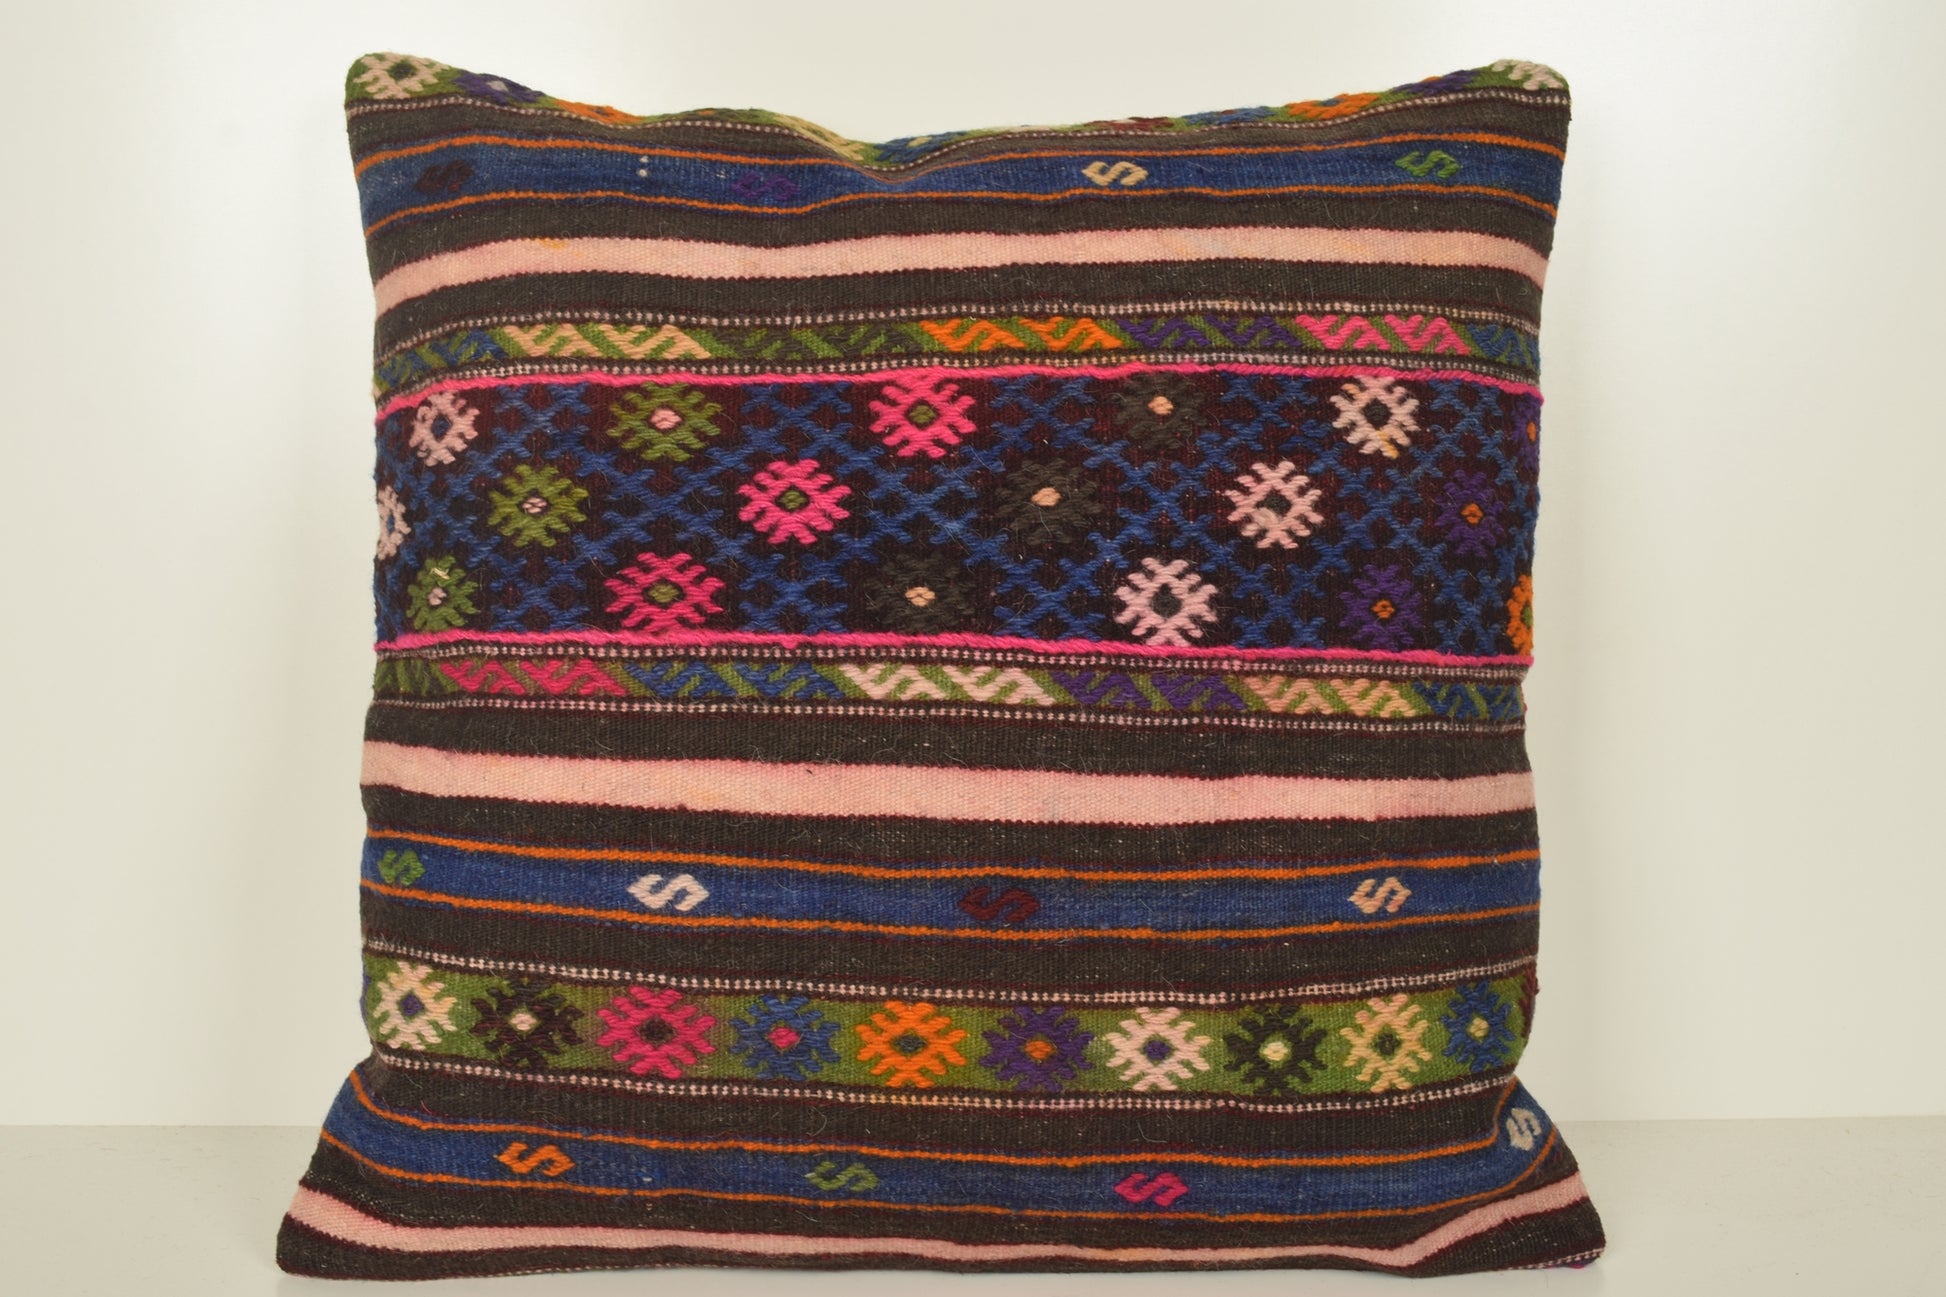 Turkish Tapestry Cushions A00893 24x24 Decor Luxury Strong Handwoven